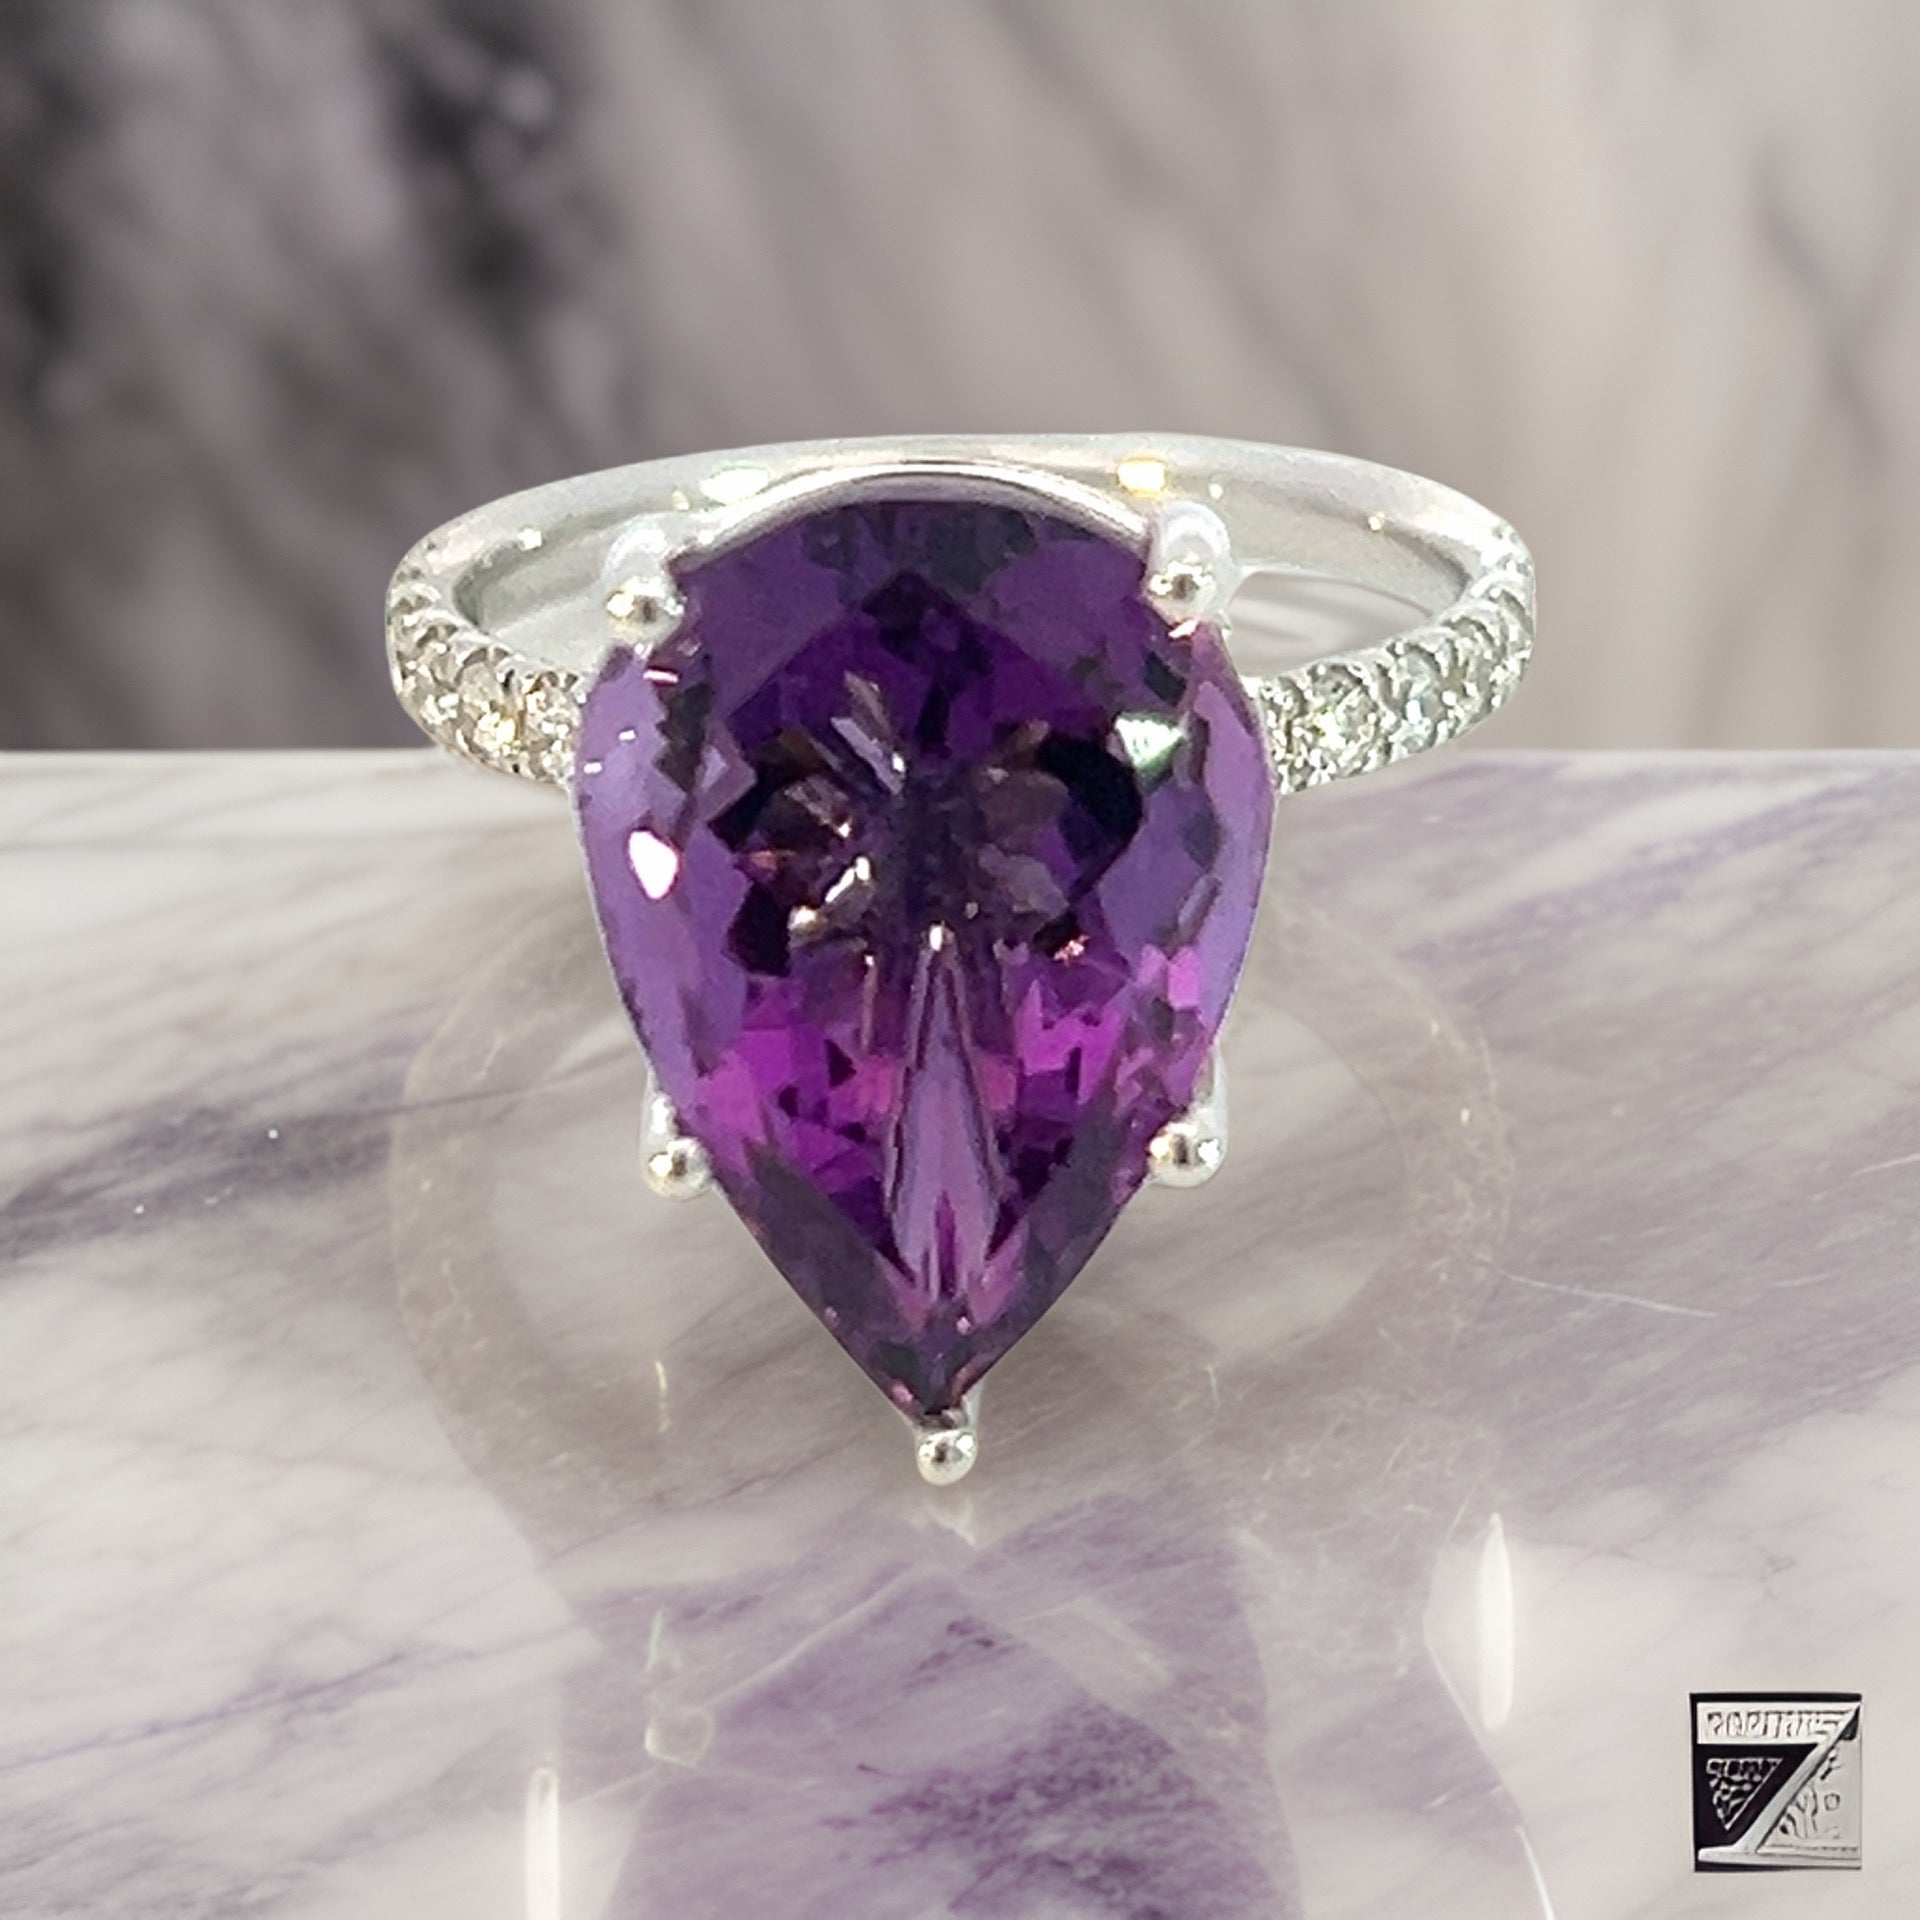 1.35 Carat Princess Cut Amethyst Engagement Ring, Wedding Ring, 14k White  Gold Unique Vintage Antique Style Handmade Certified